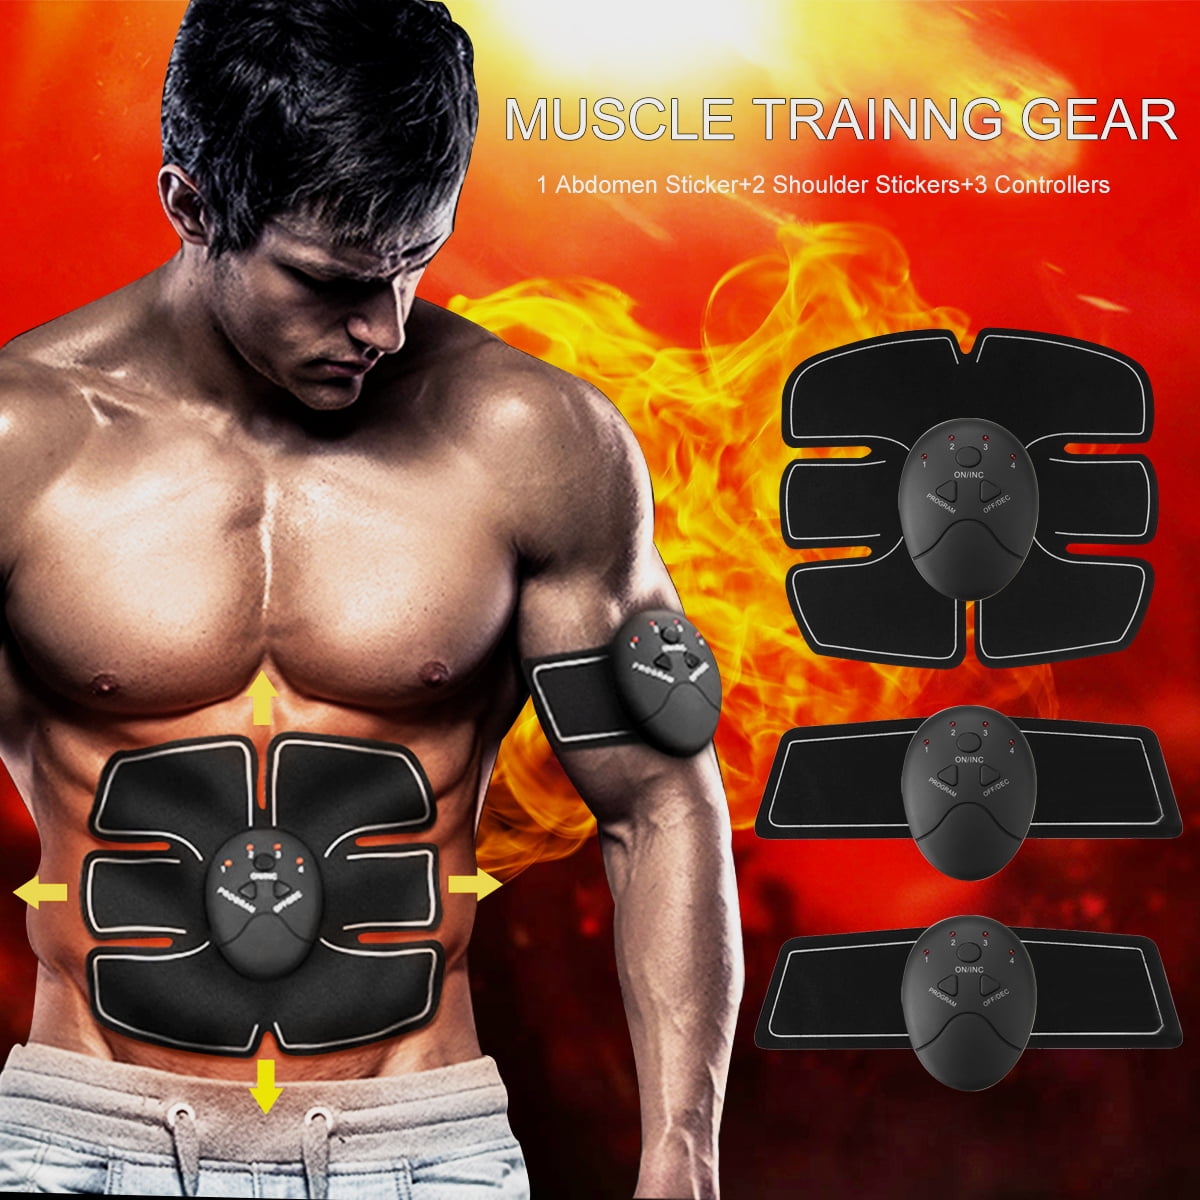 Stimulator Muscle Abdominal Belt Portable Ab Waist Muscle Exerciser Gear Fitness Device for Abdomen Arm Men And Women freneci Abs Trainer